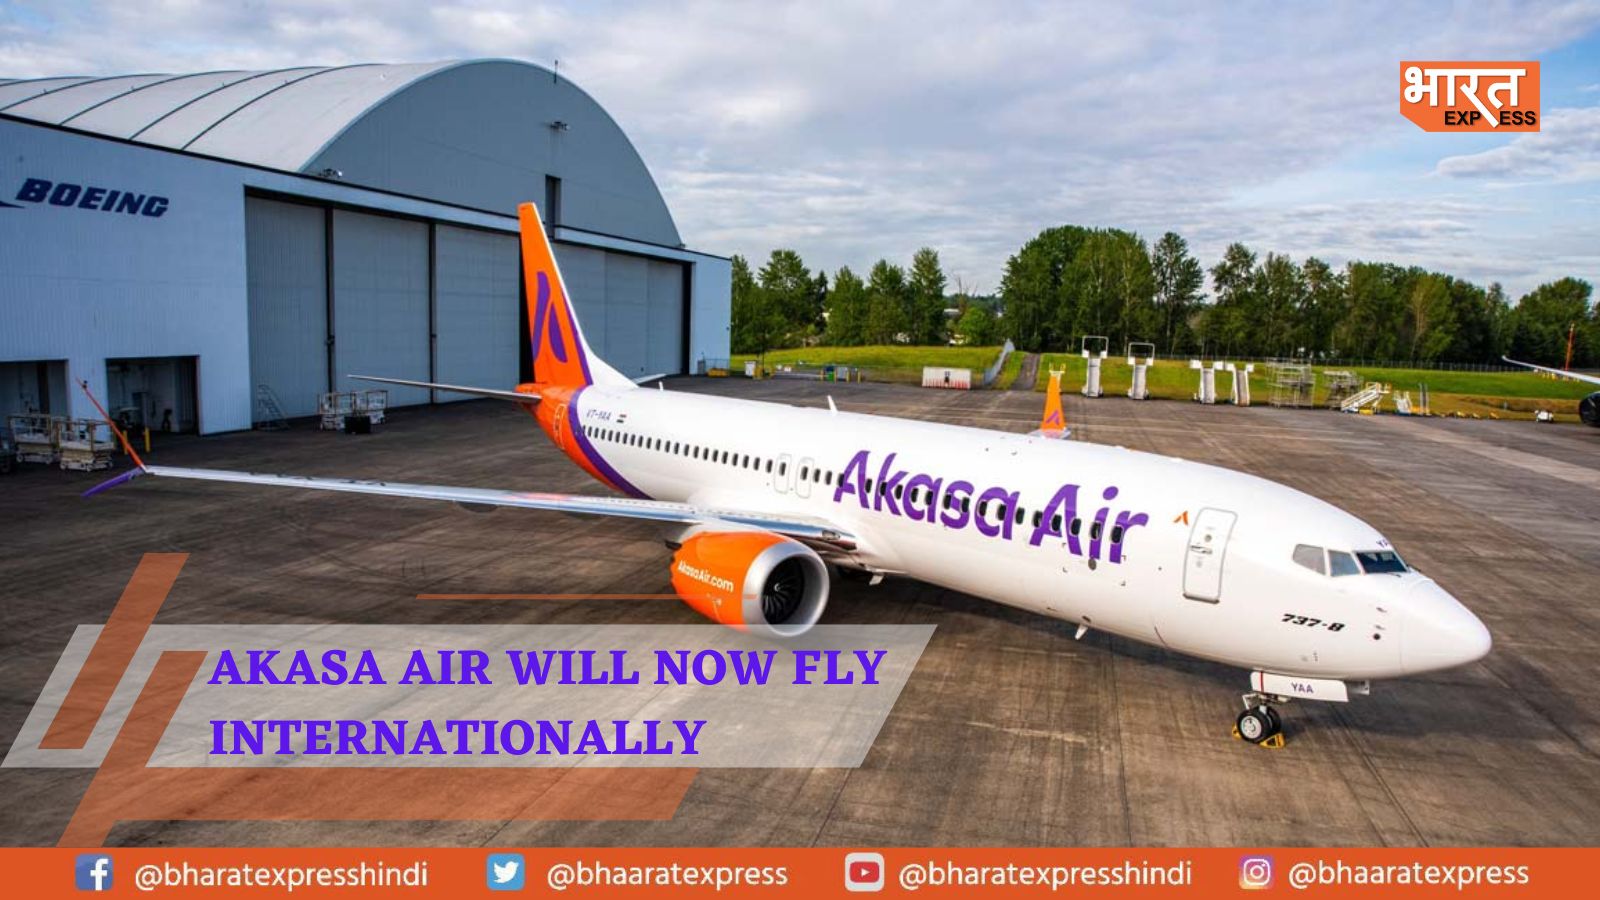 Fly to your next international destination with Akasa Air